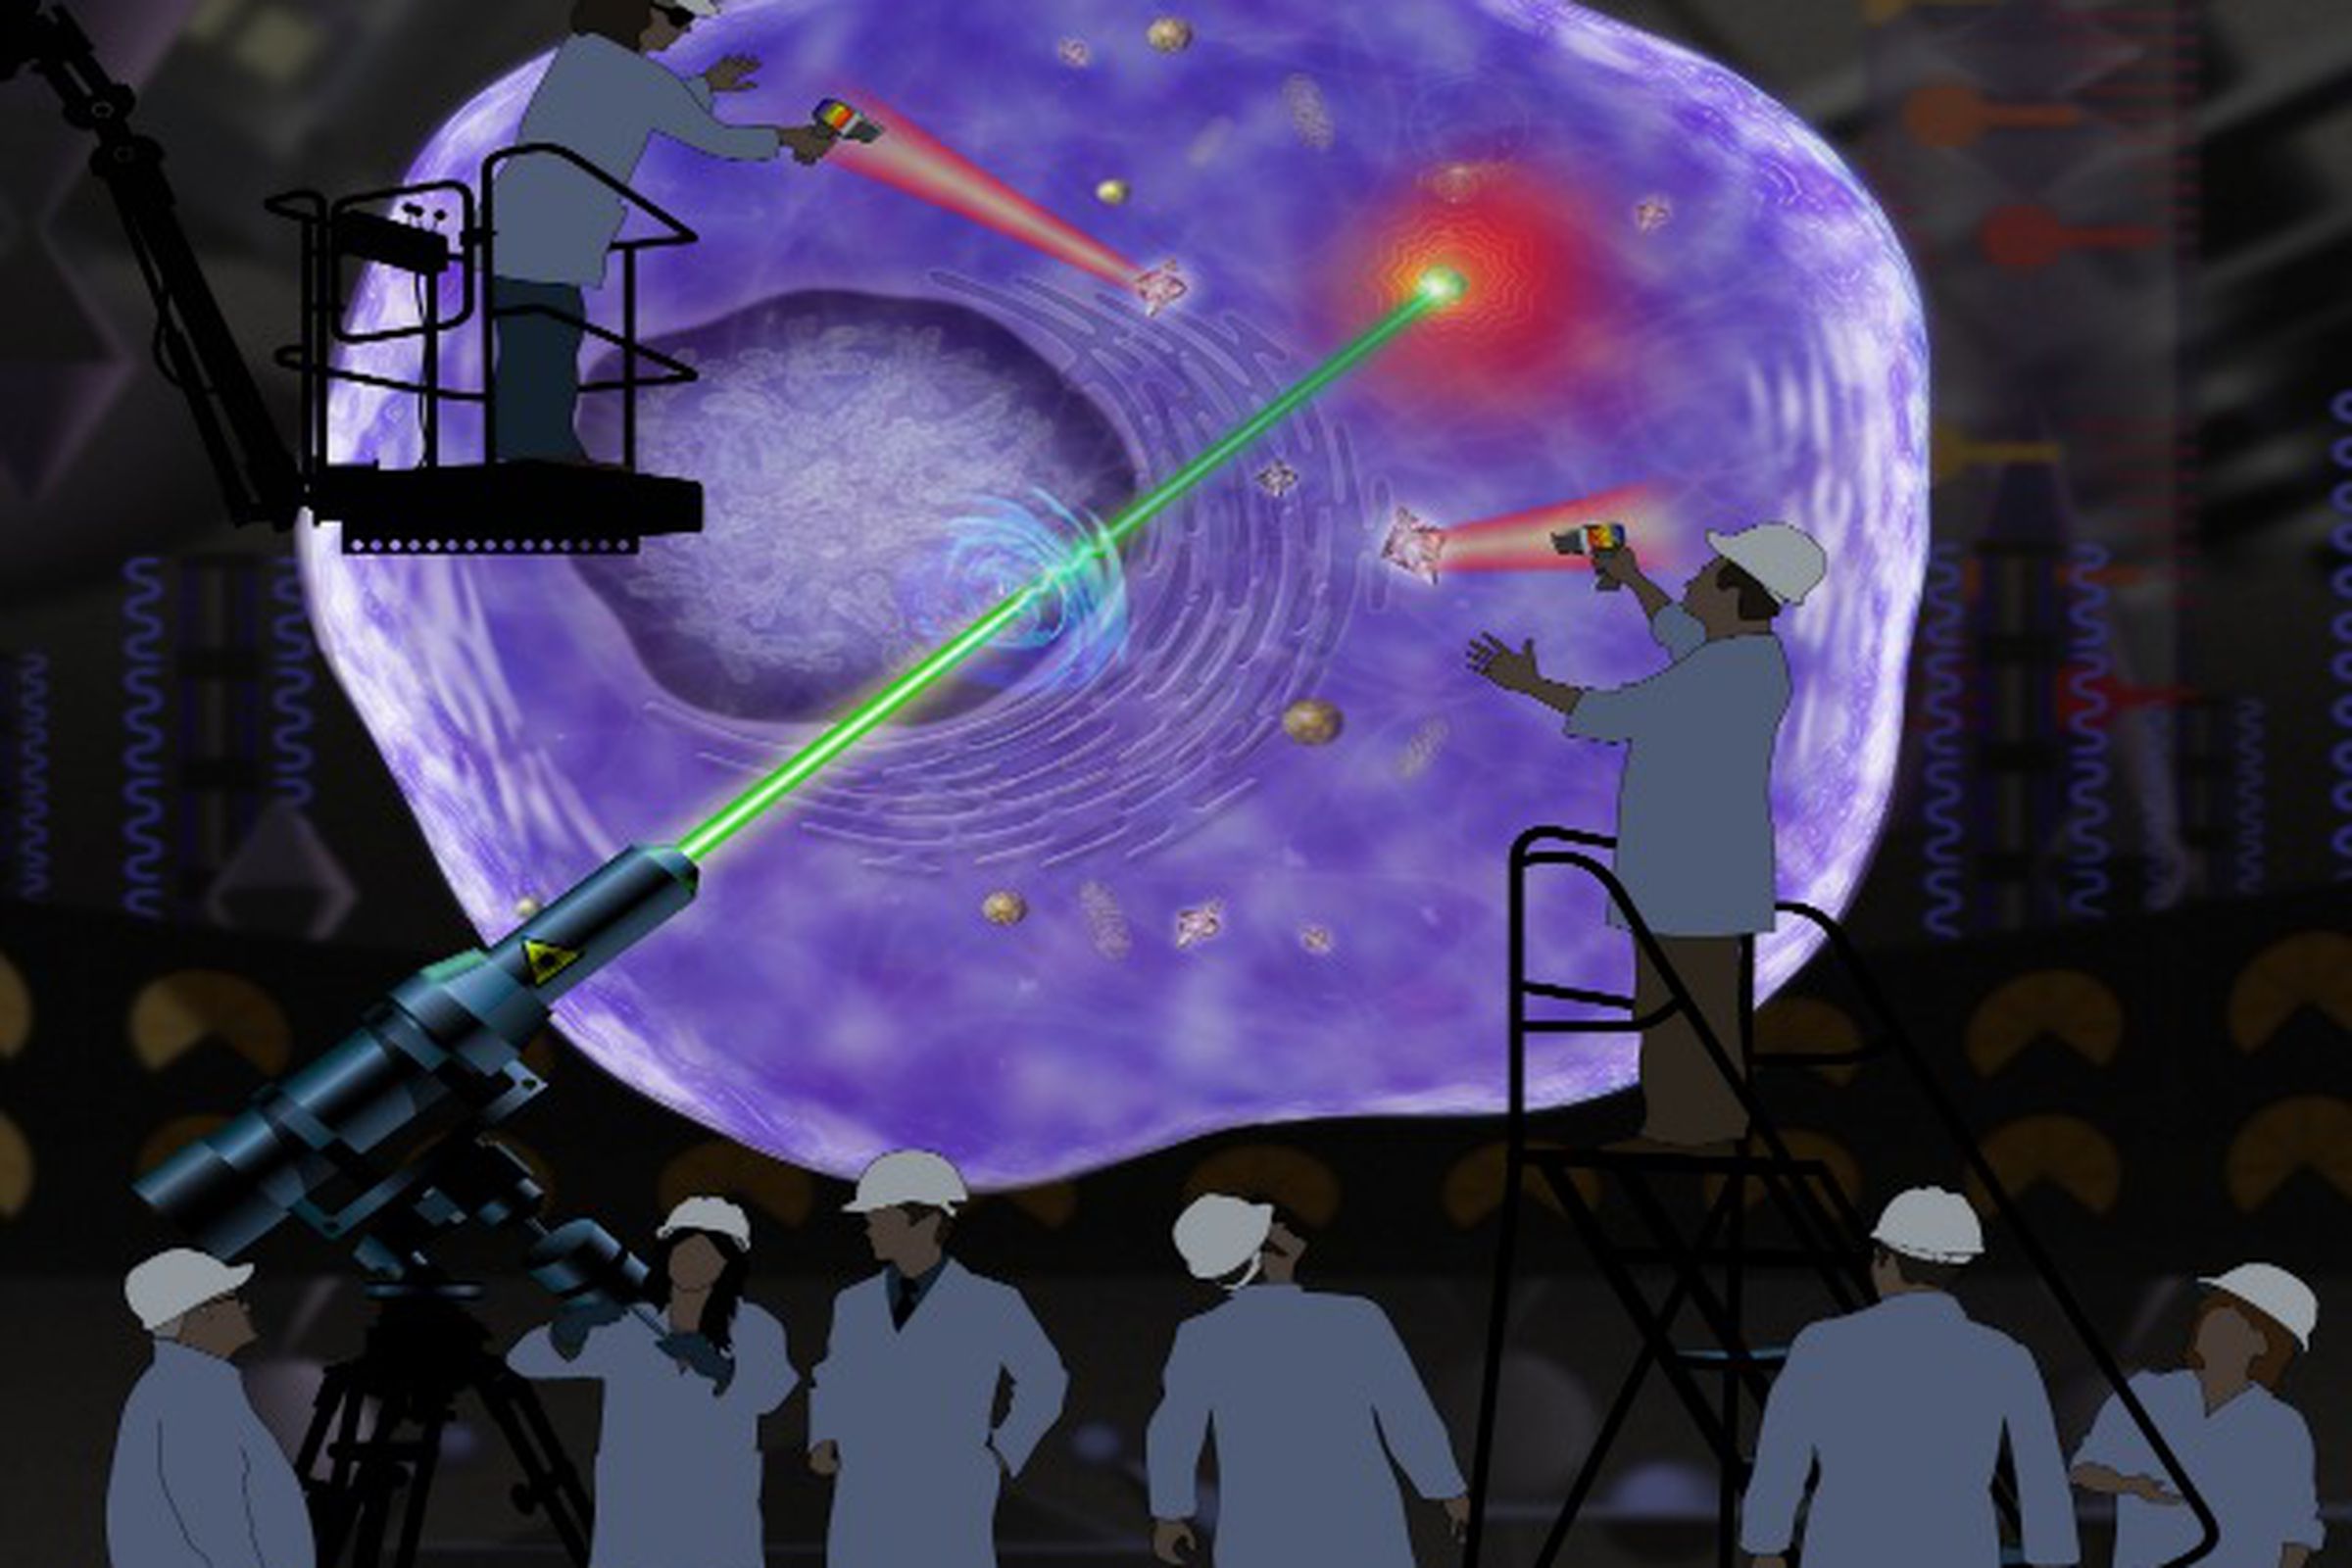 Artist conception of DARPA heating gold nanoparticles in a cell. Credit: Steven H. Lee